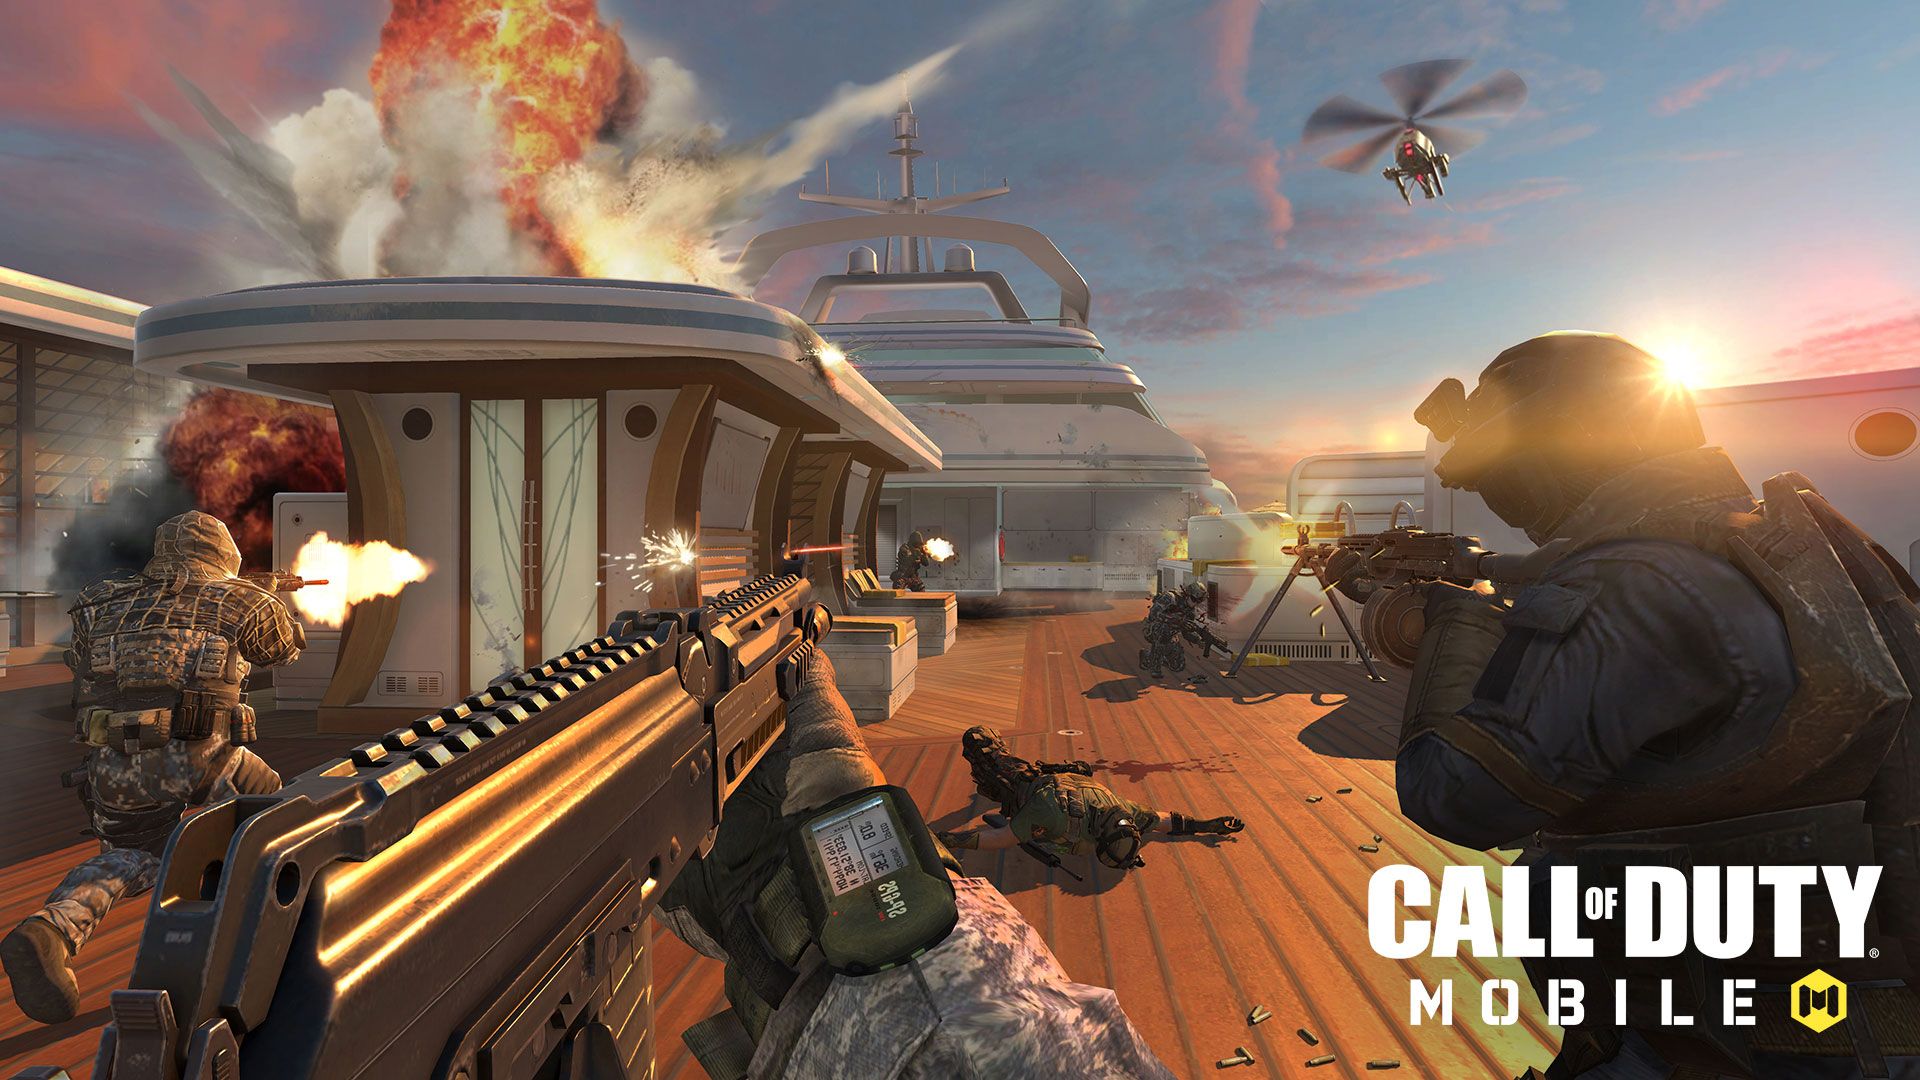 New details on Call of Duty: Mobile announced, including new MP content